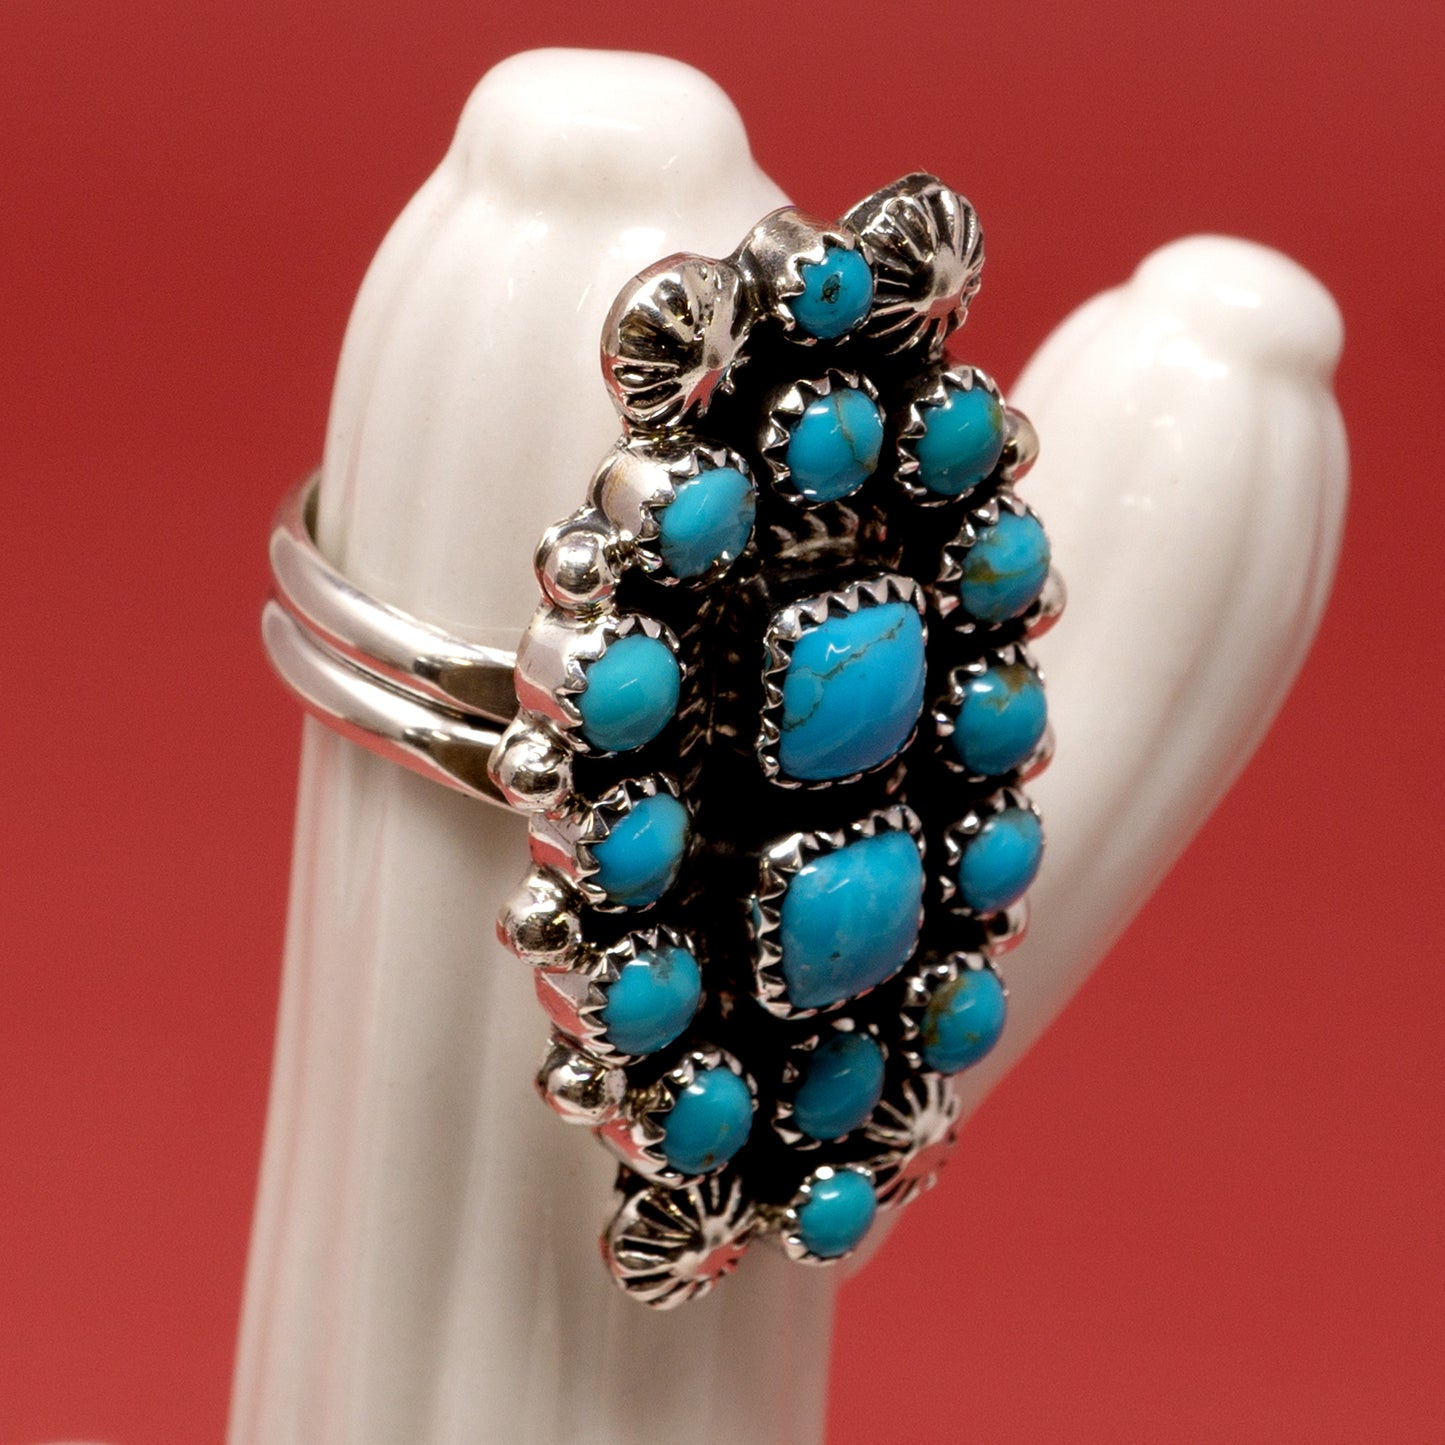 16 Sleeping Beauty Turquoise Cabochons in Classic Setting | Adjustable Band Ring